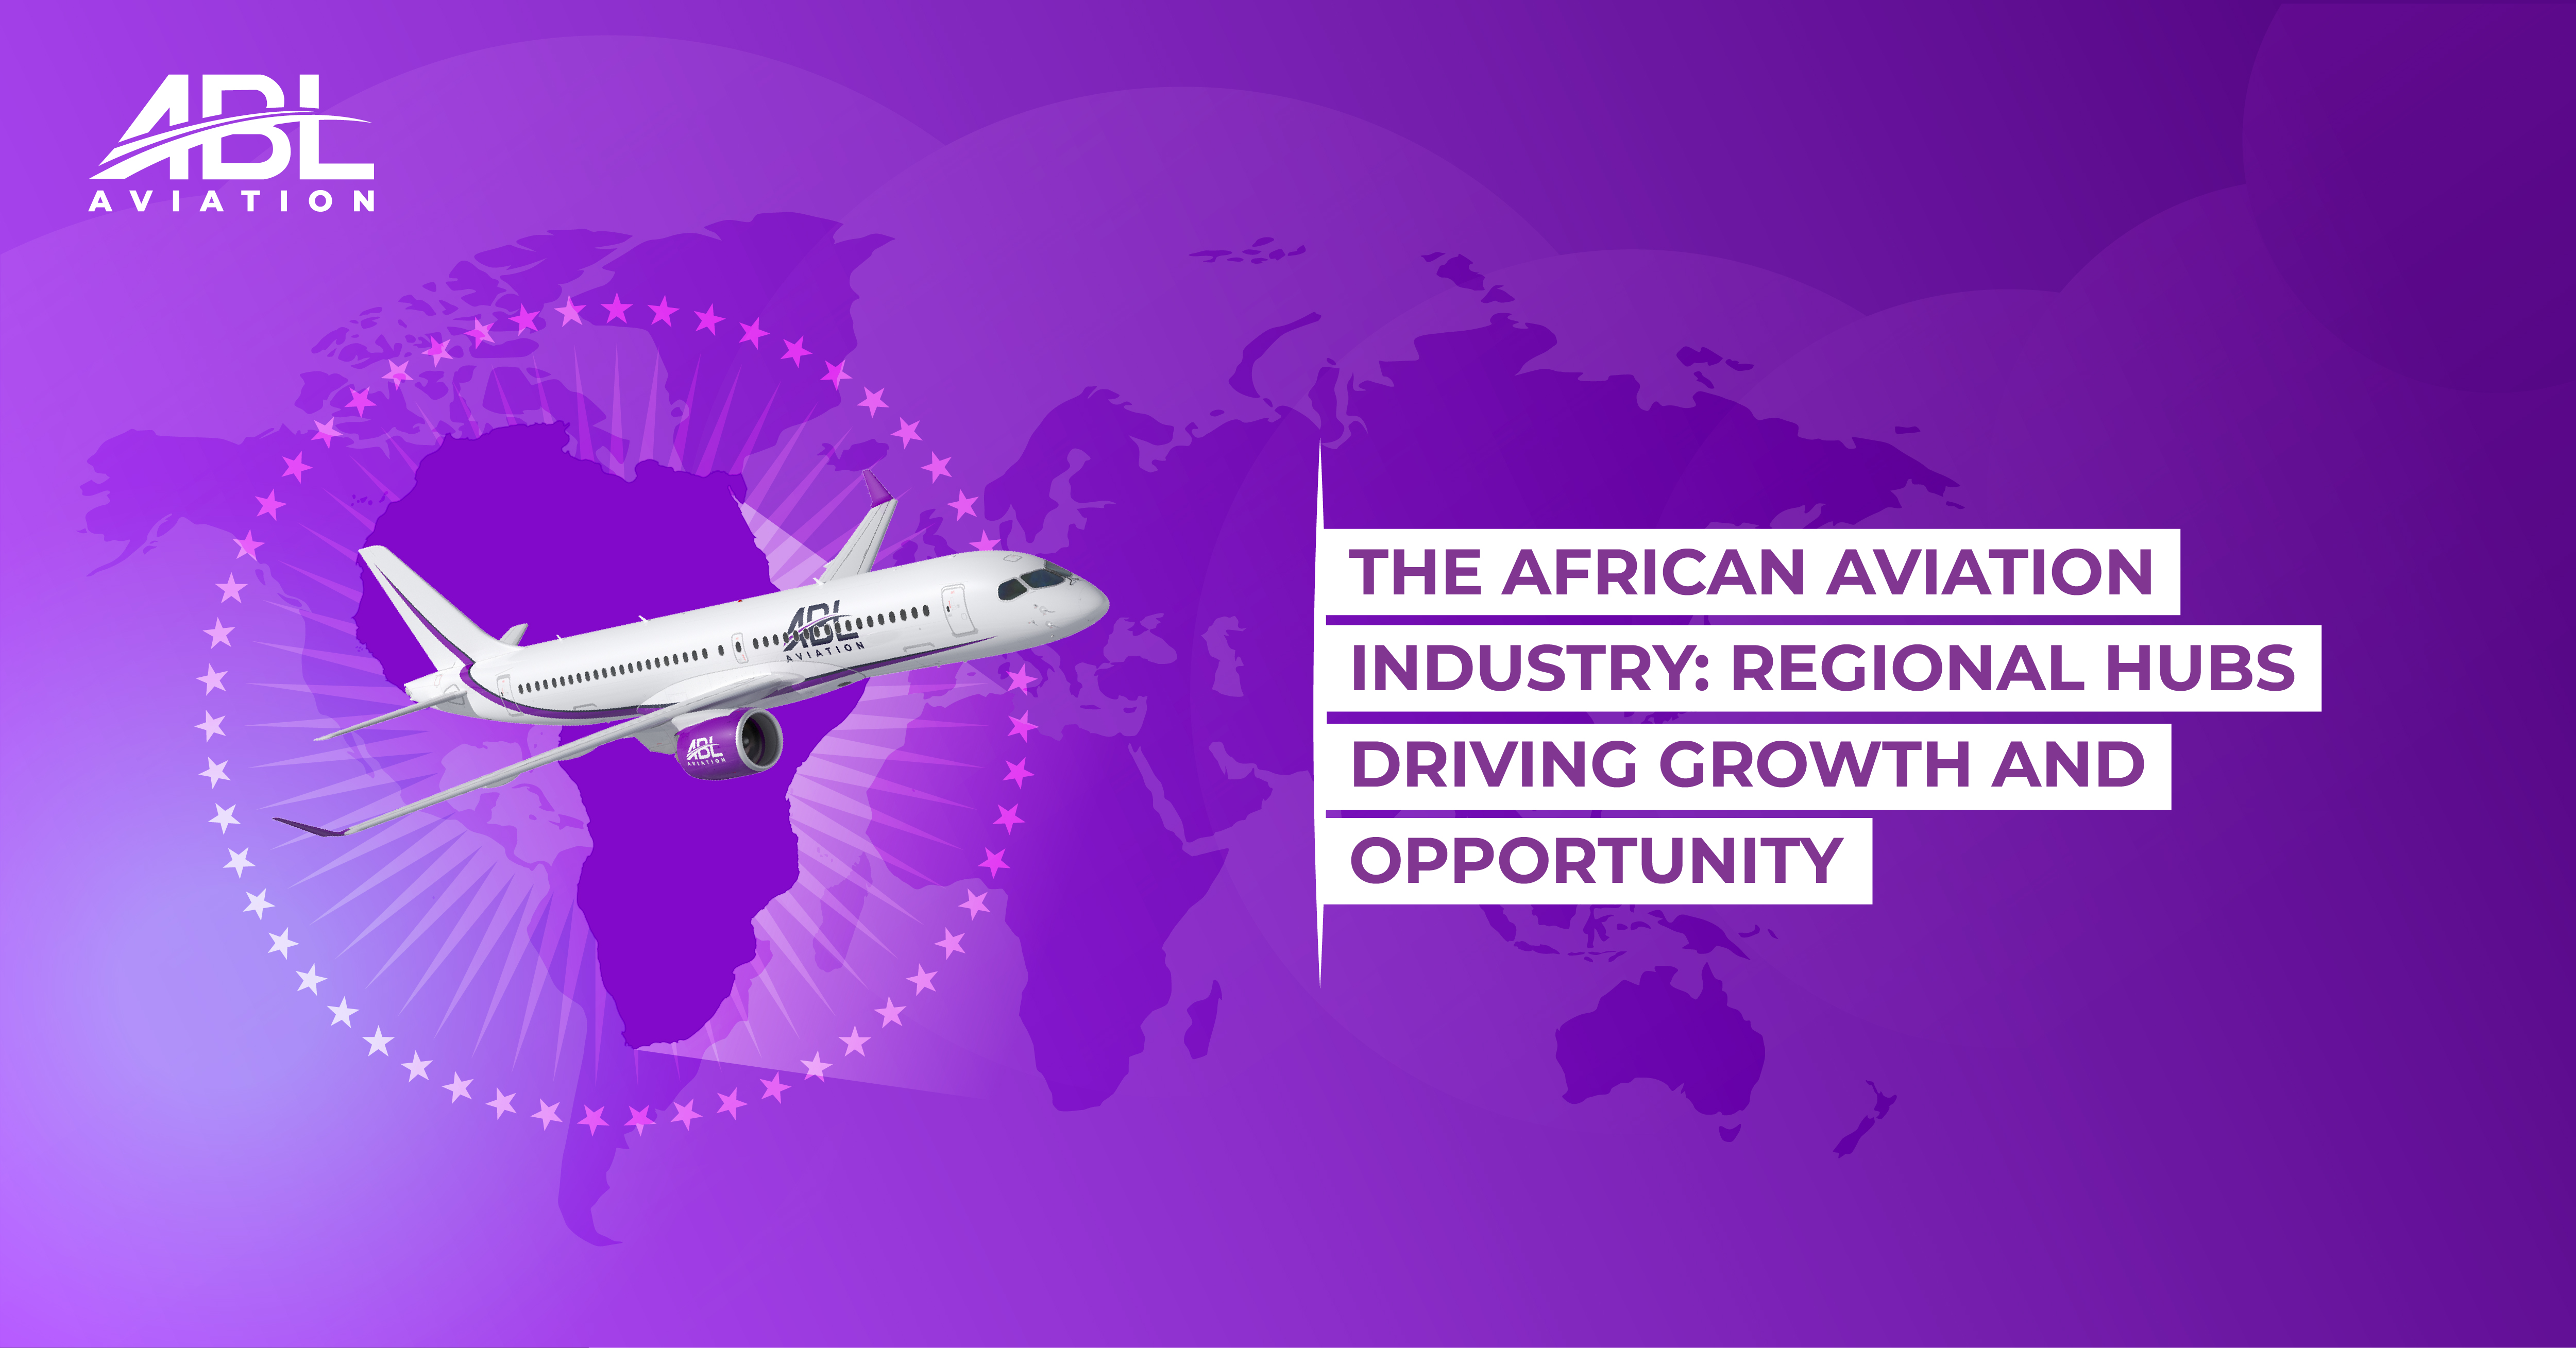 The African Aviation Industry: Regional Hubs Driving Growth and Opportunity